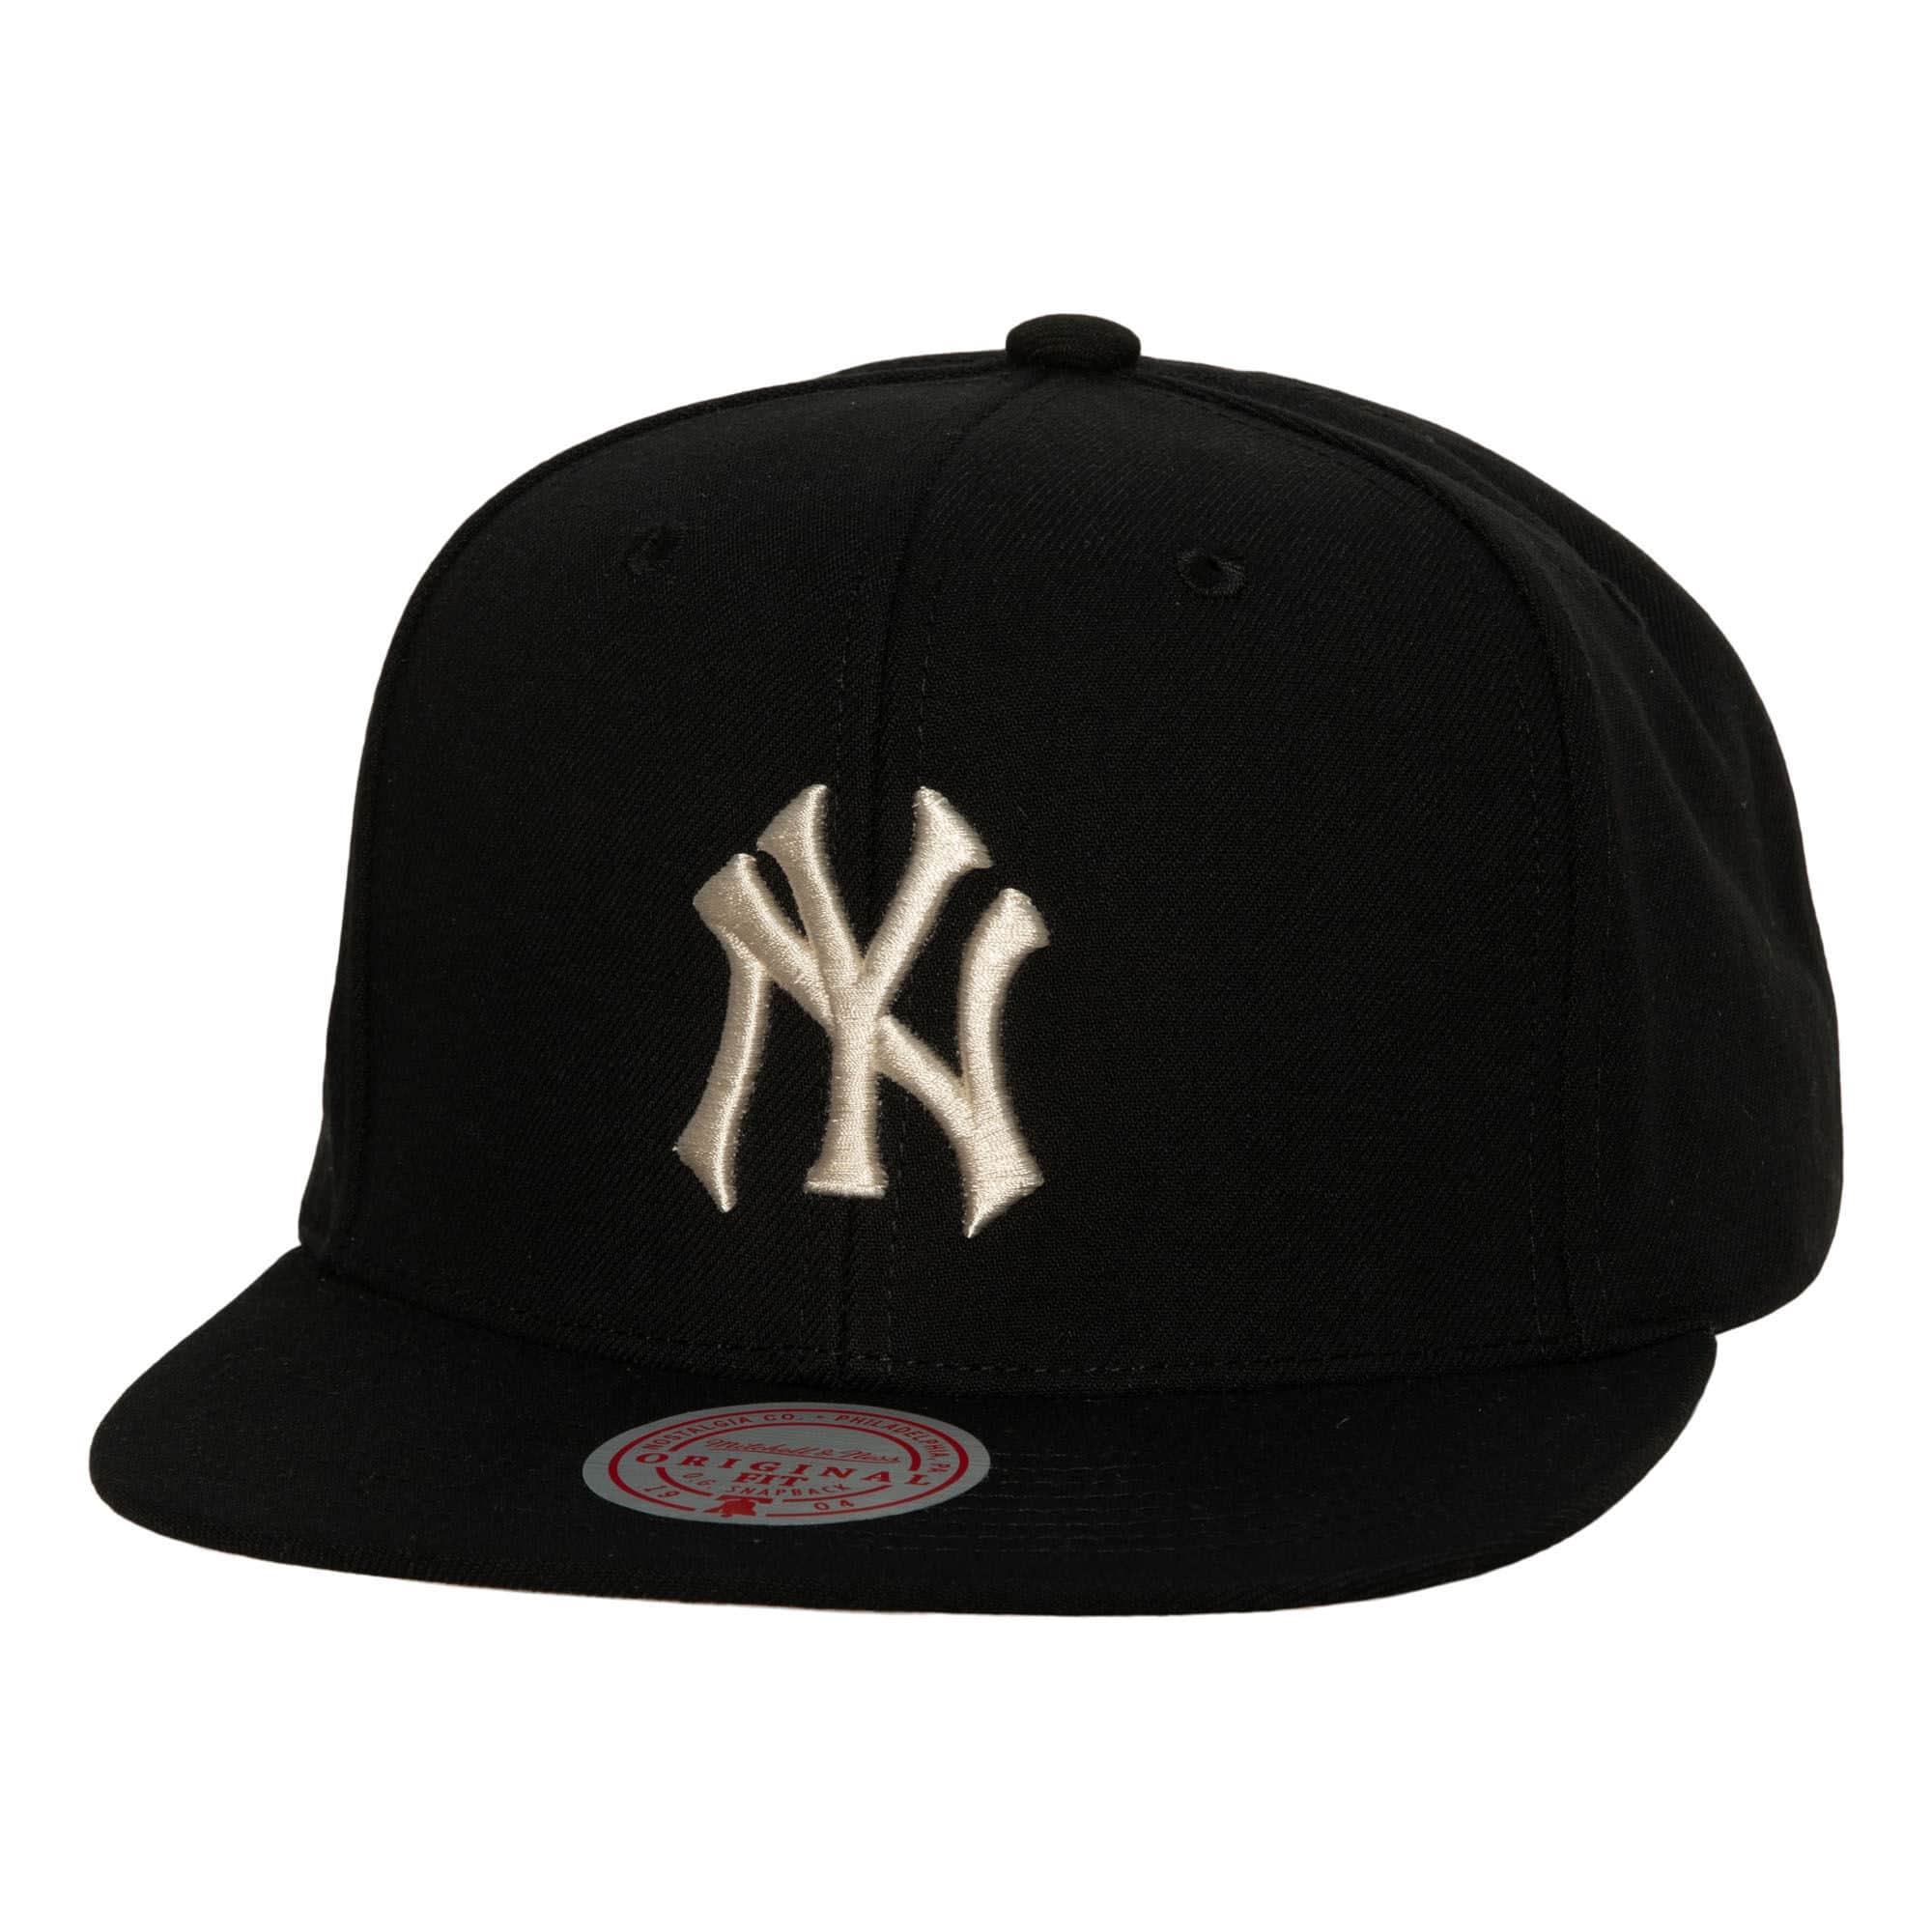 MITCHELL&NESS YANKEES TM CLASSIC SNAP